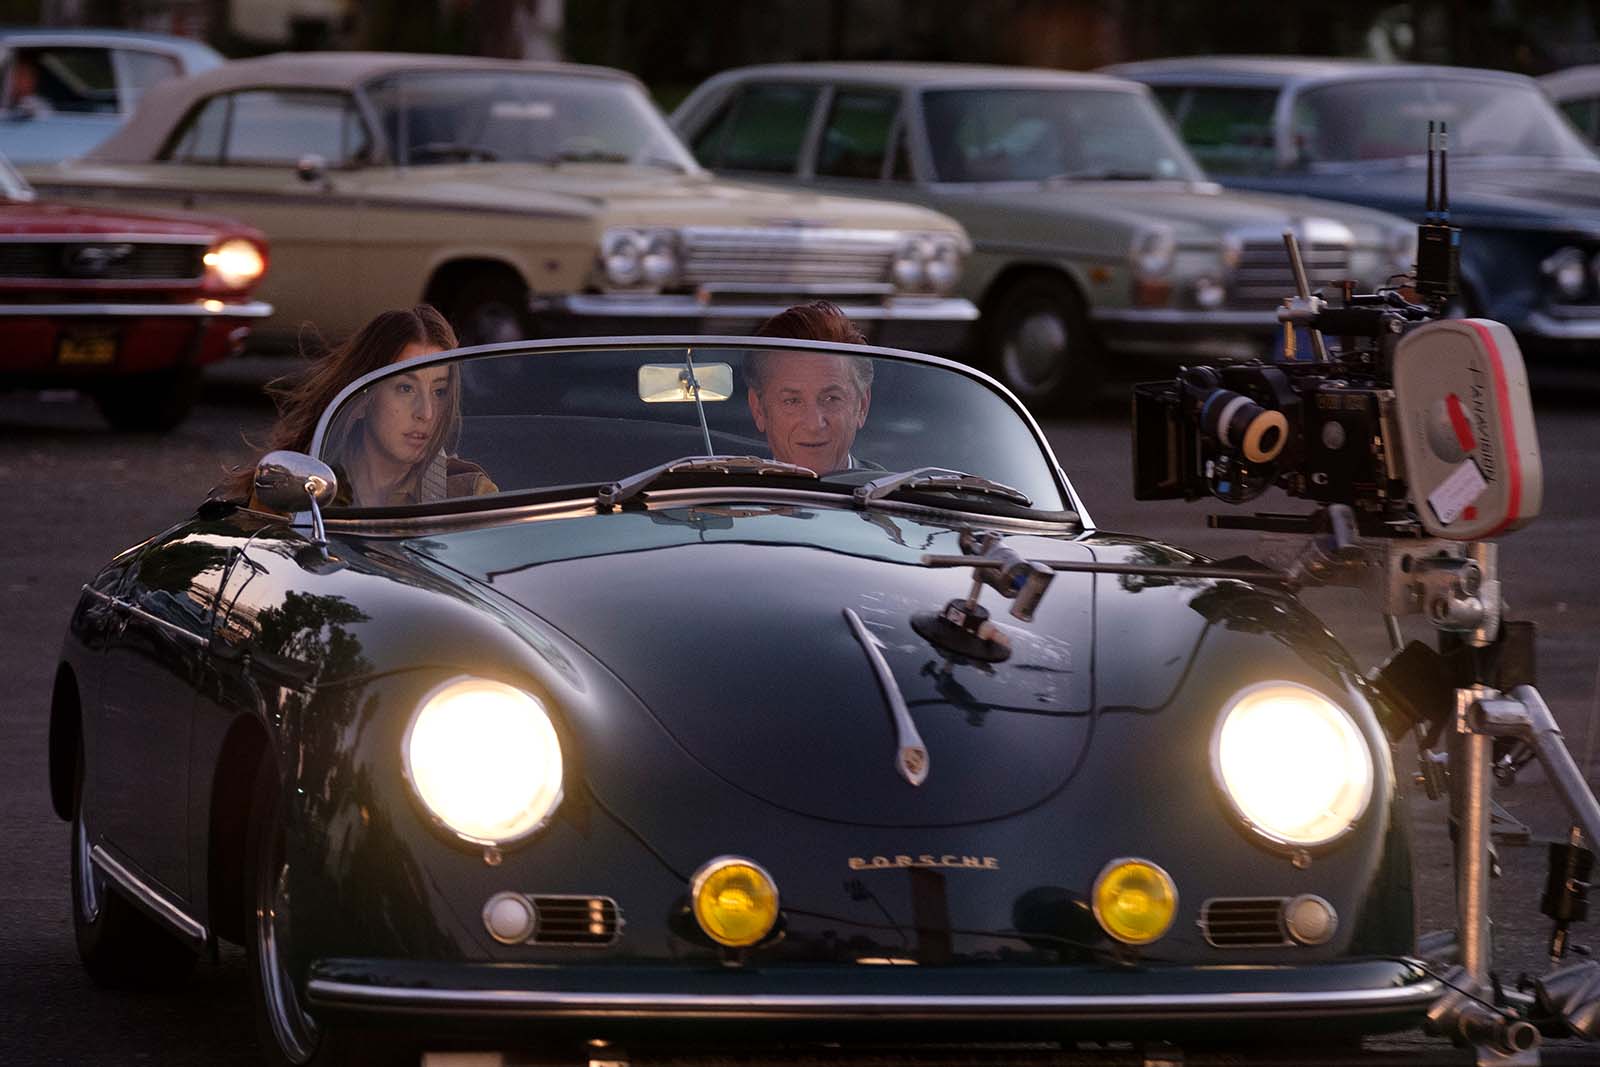 Clamping the camera rig to a classic Porsche 356 (note the cling-film beneath the sucker pads). Image © MGM Studios